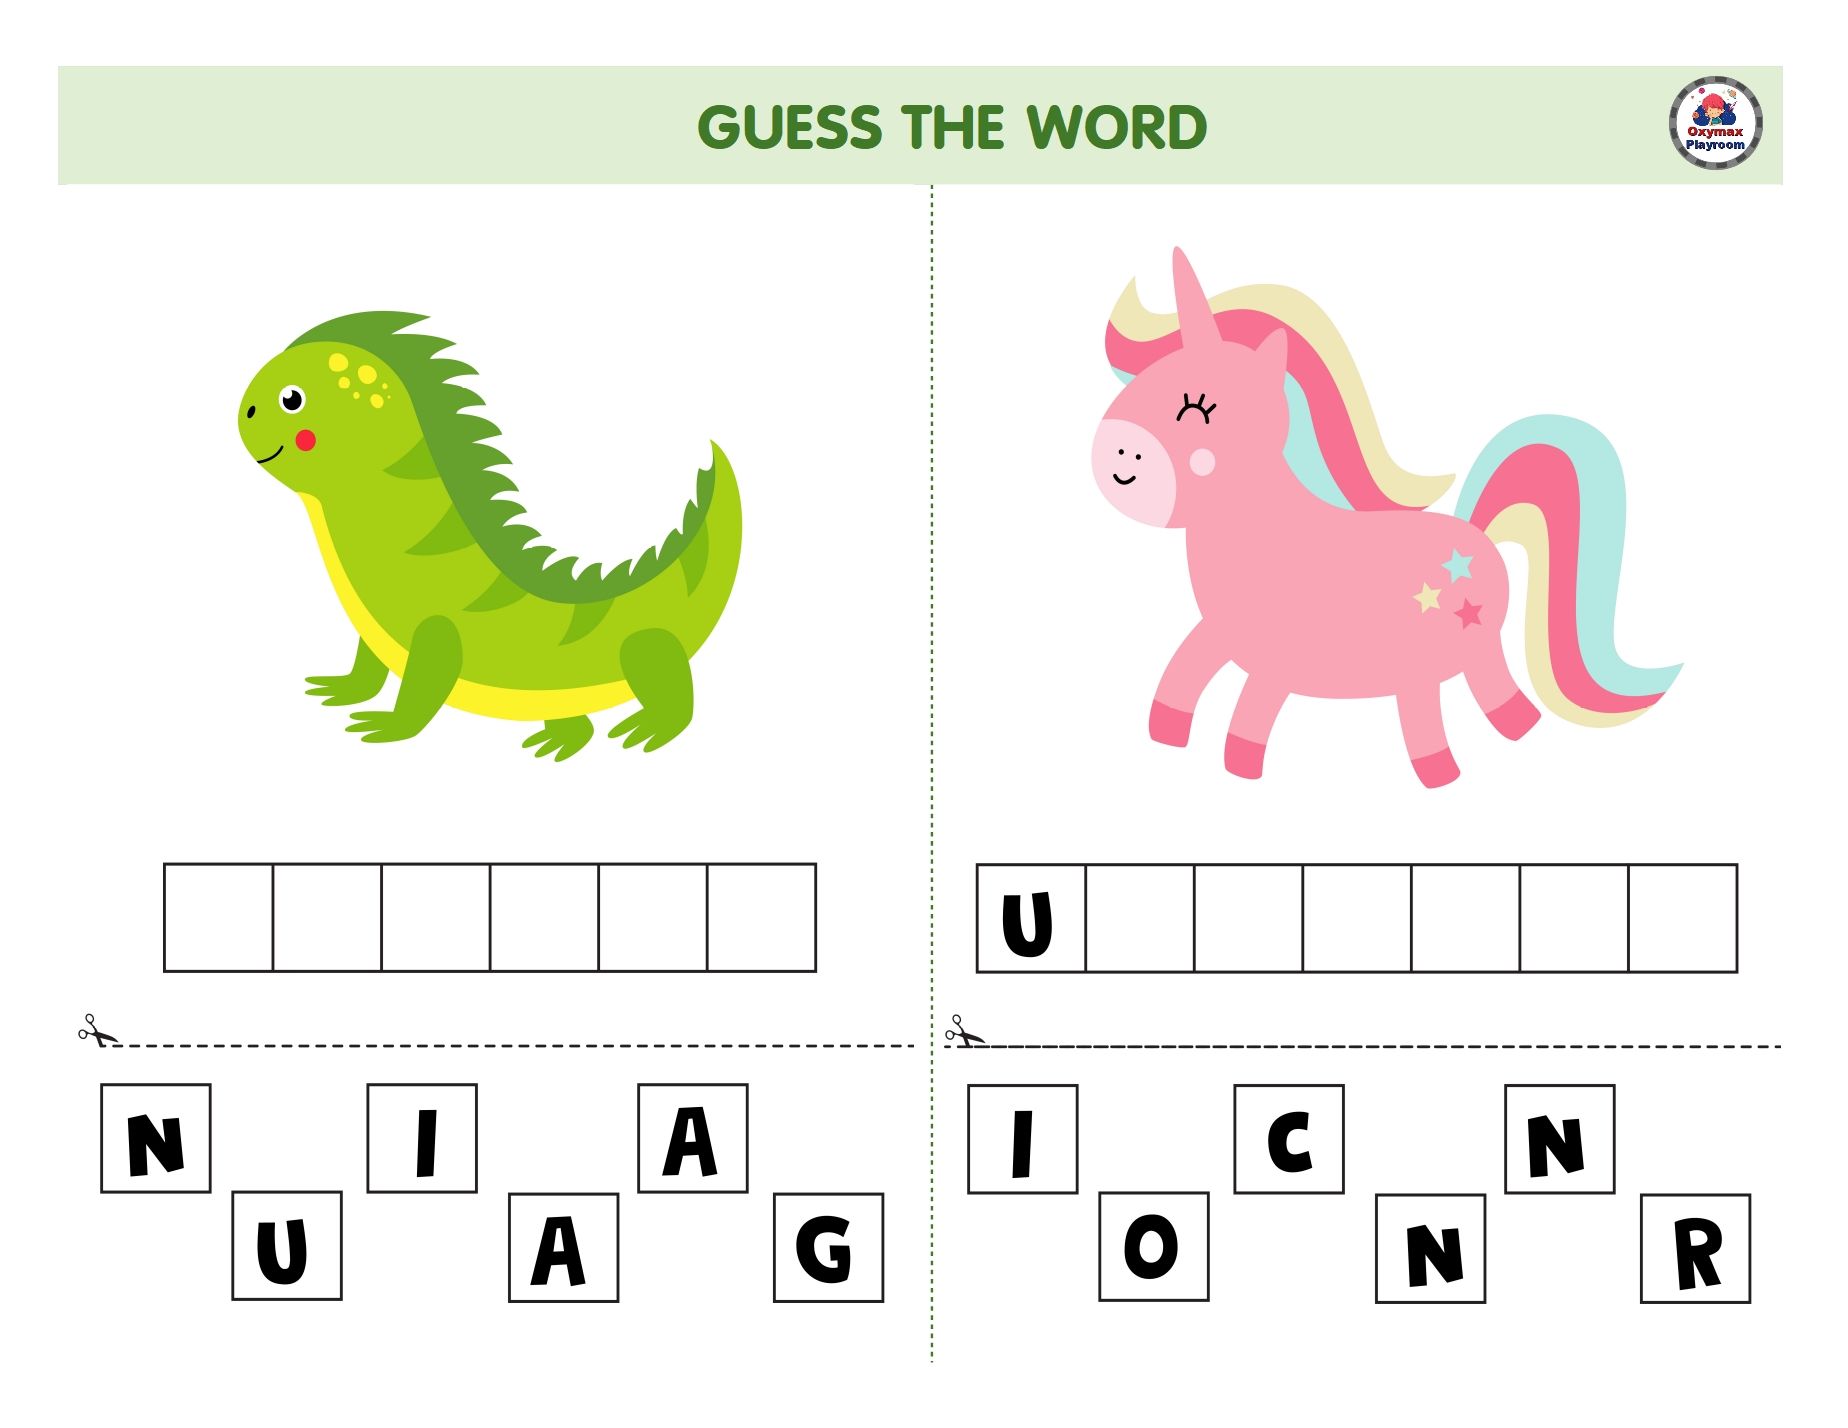 1 guess the words. Guess the Word game. Guesword. Guess the Word for Kids. Guess the Word Cards.